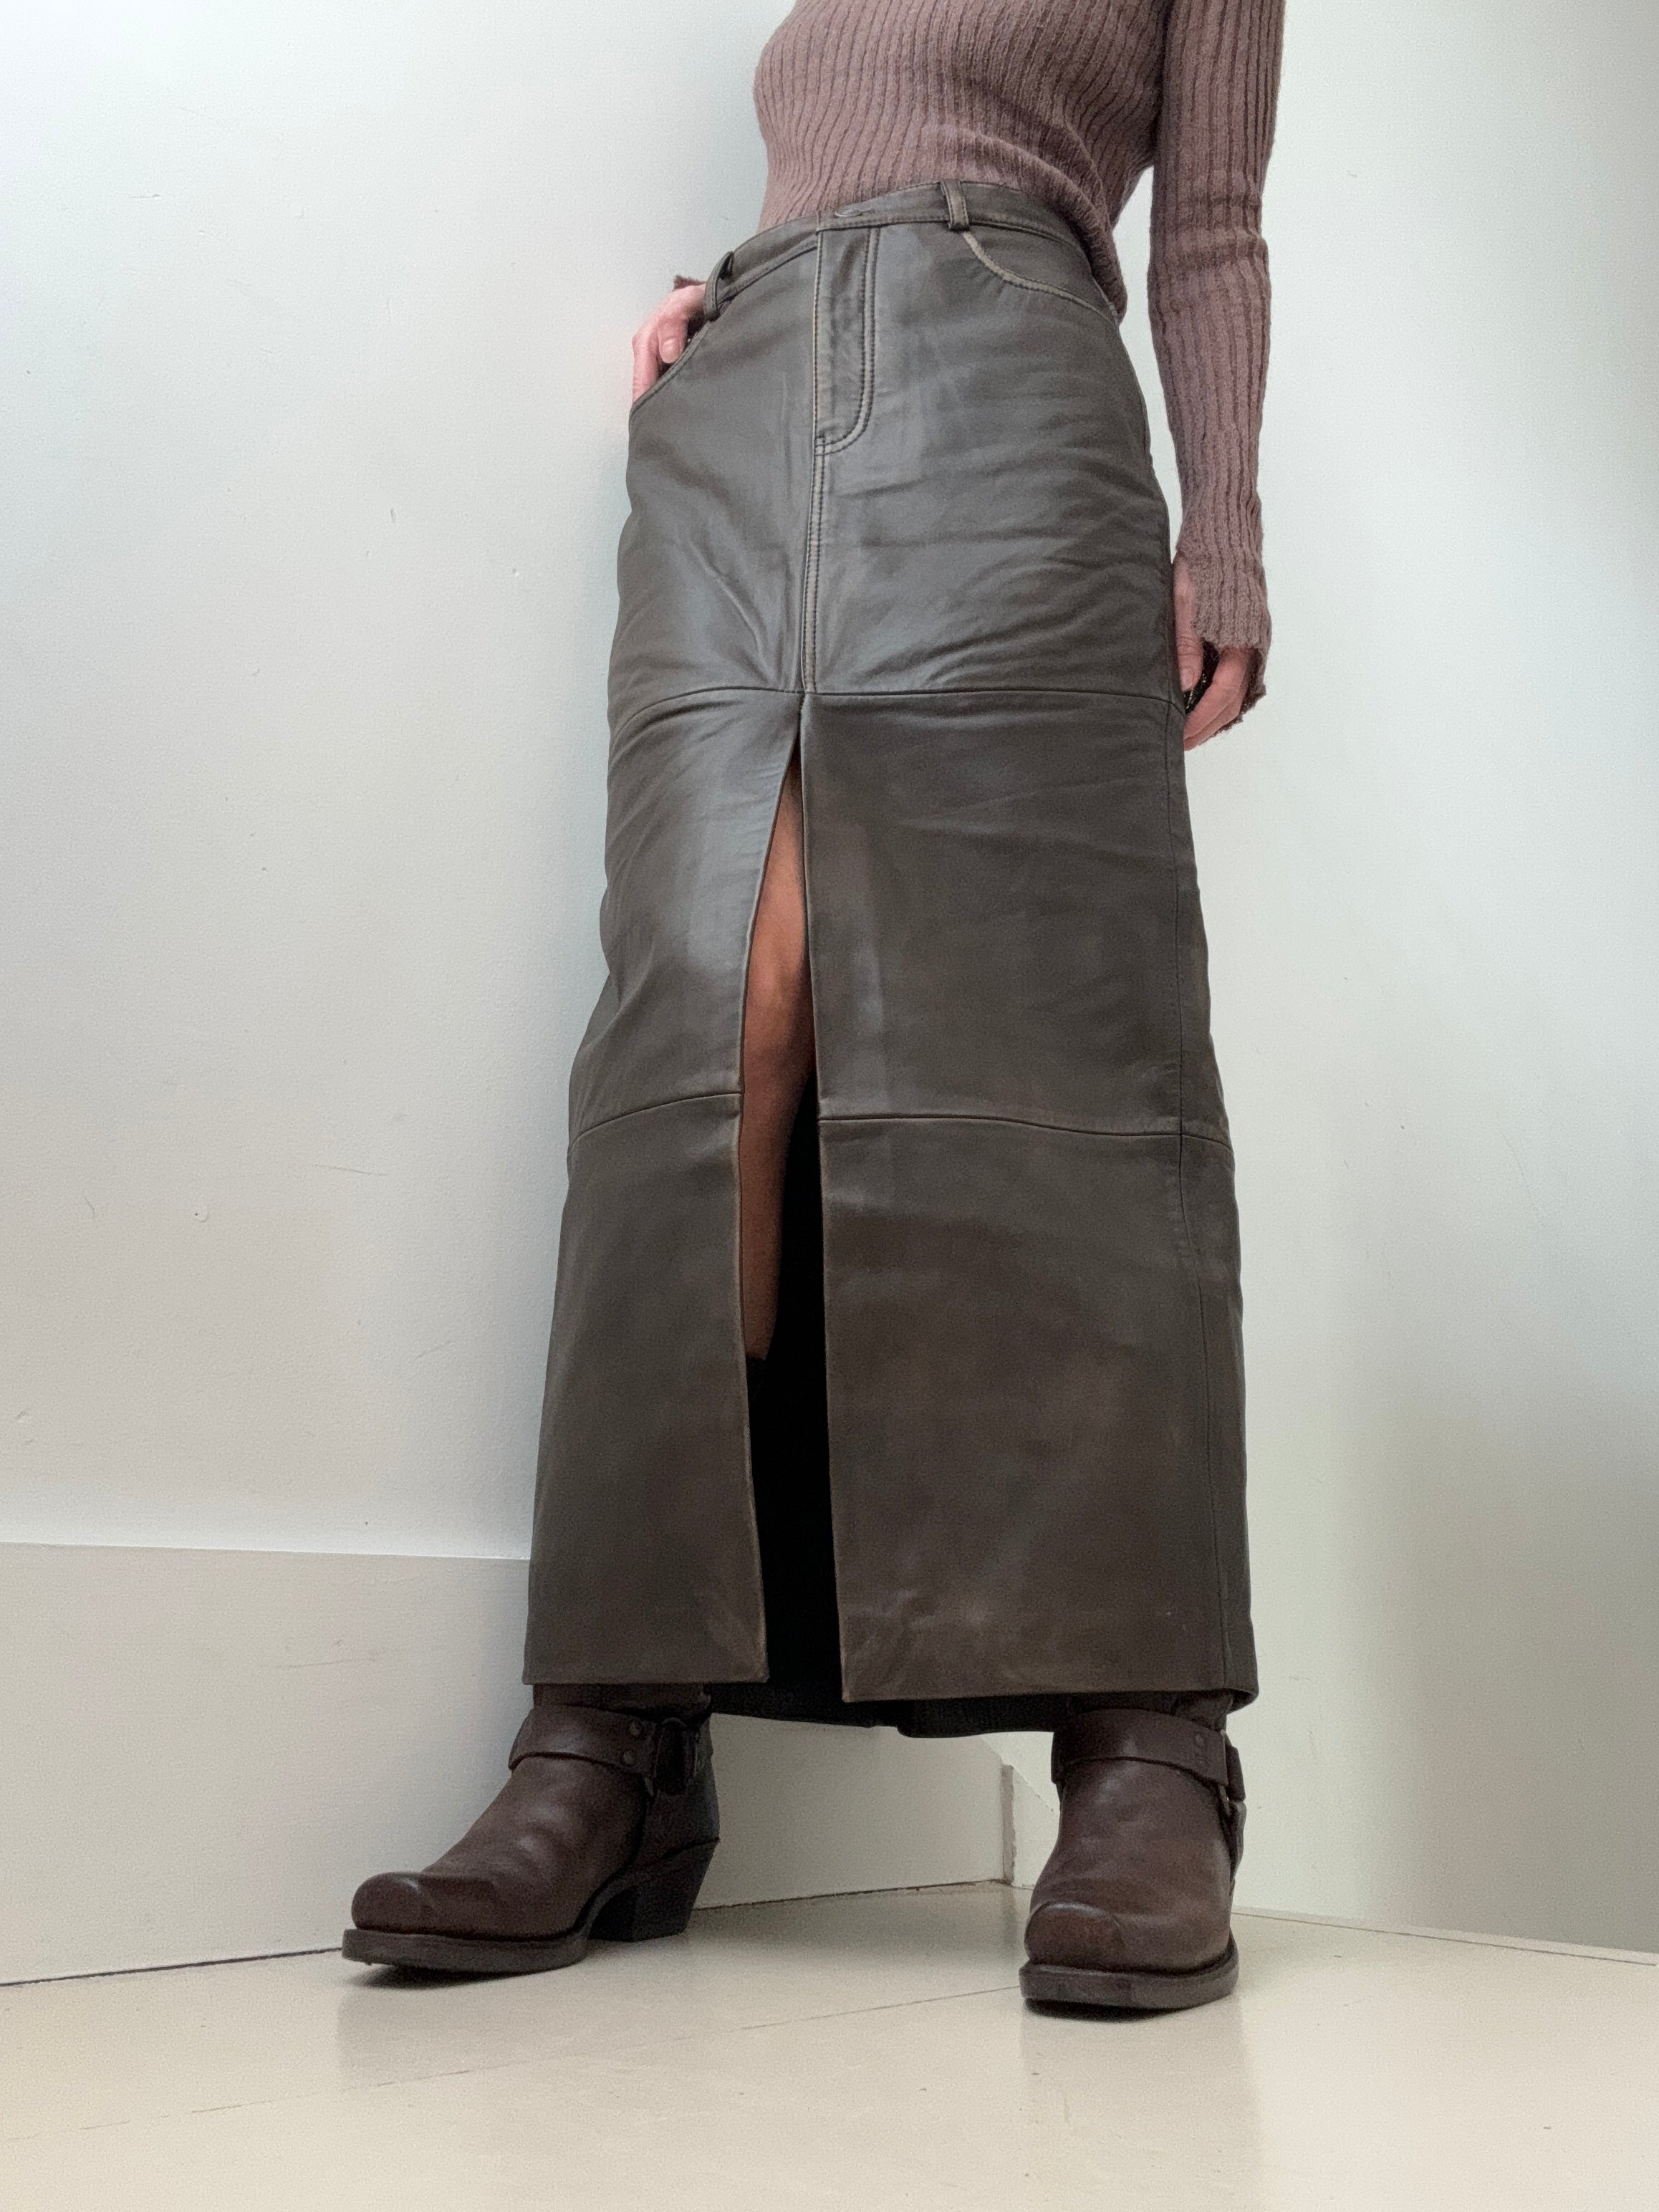 Reformation Skirts Reformation Veda Tazz Leather Maxi Skirt